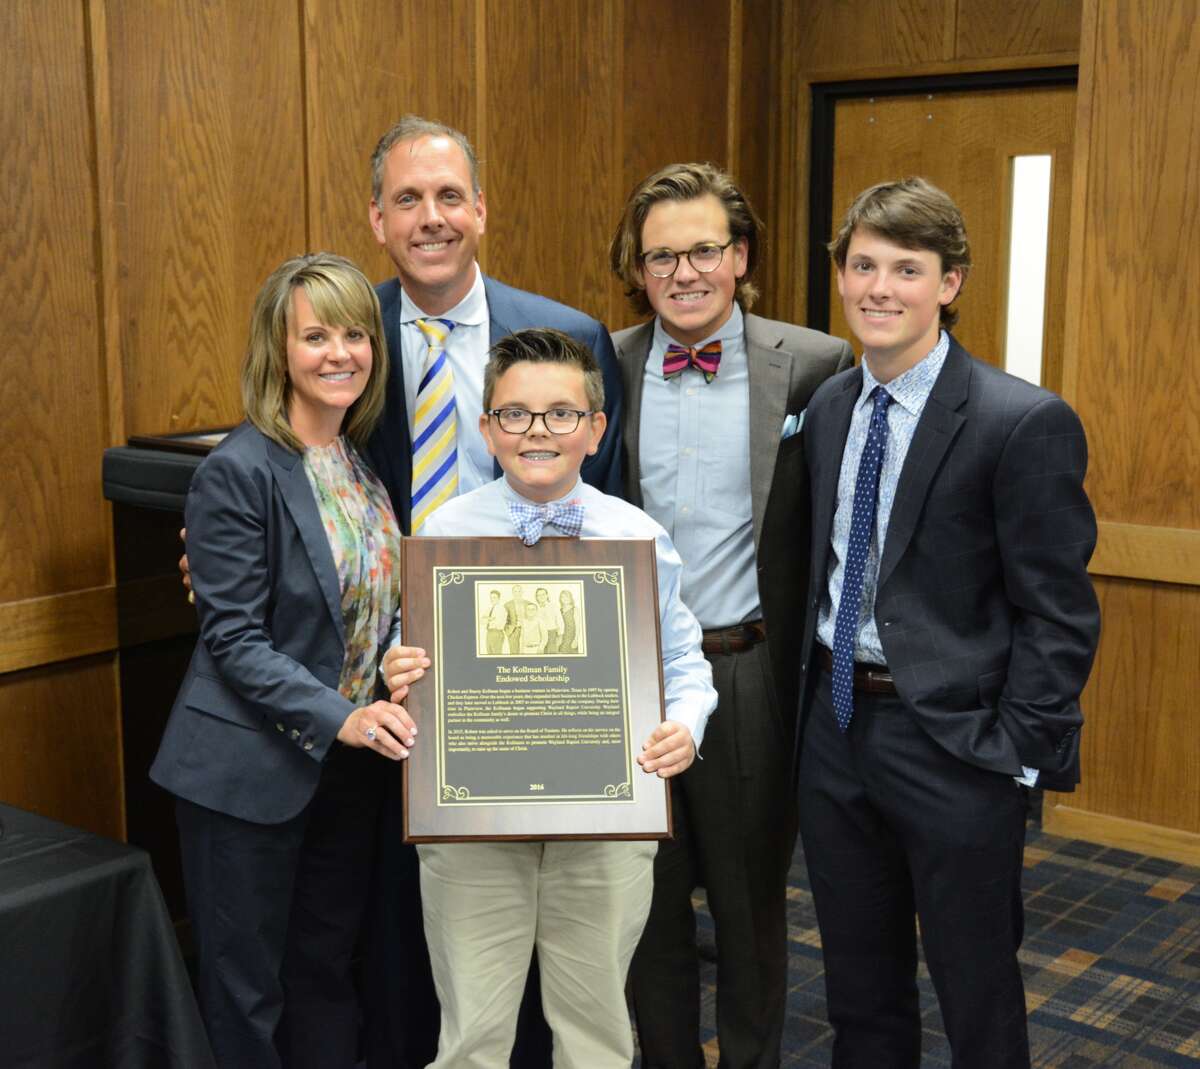 Wayland Board Trustee Robert Kollman and his family were recognized for completing an endowed scholarship that will benefit students in the School of Business. Pictured are Stacey (left), Robert, Deuce (front), Zeke and Eli Kollman.